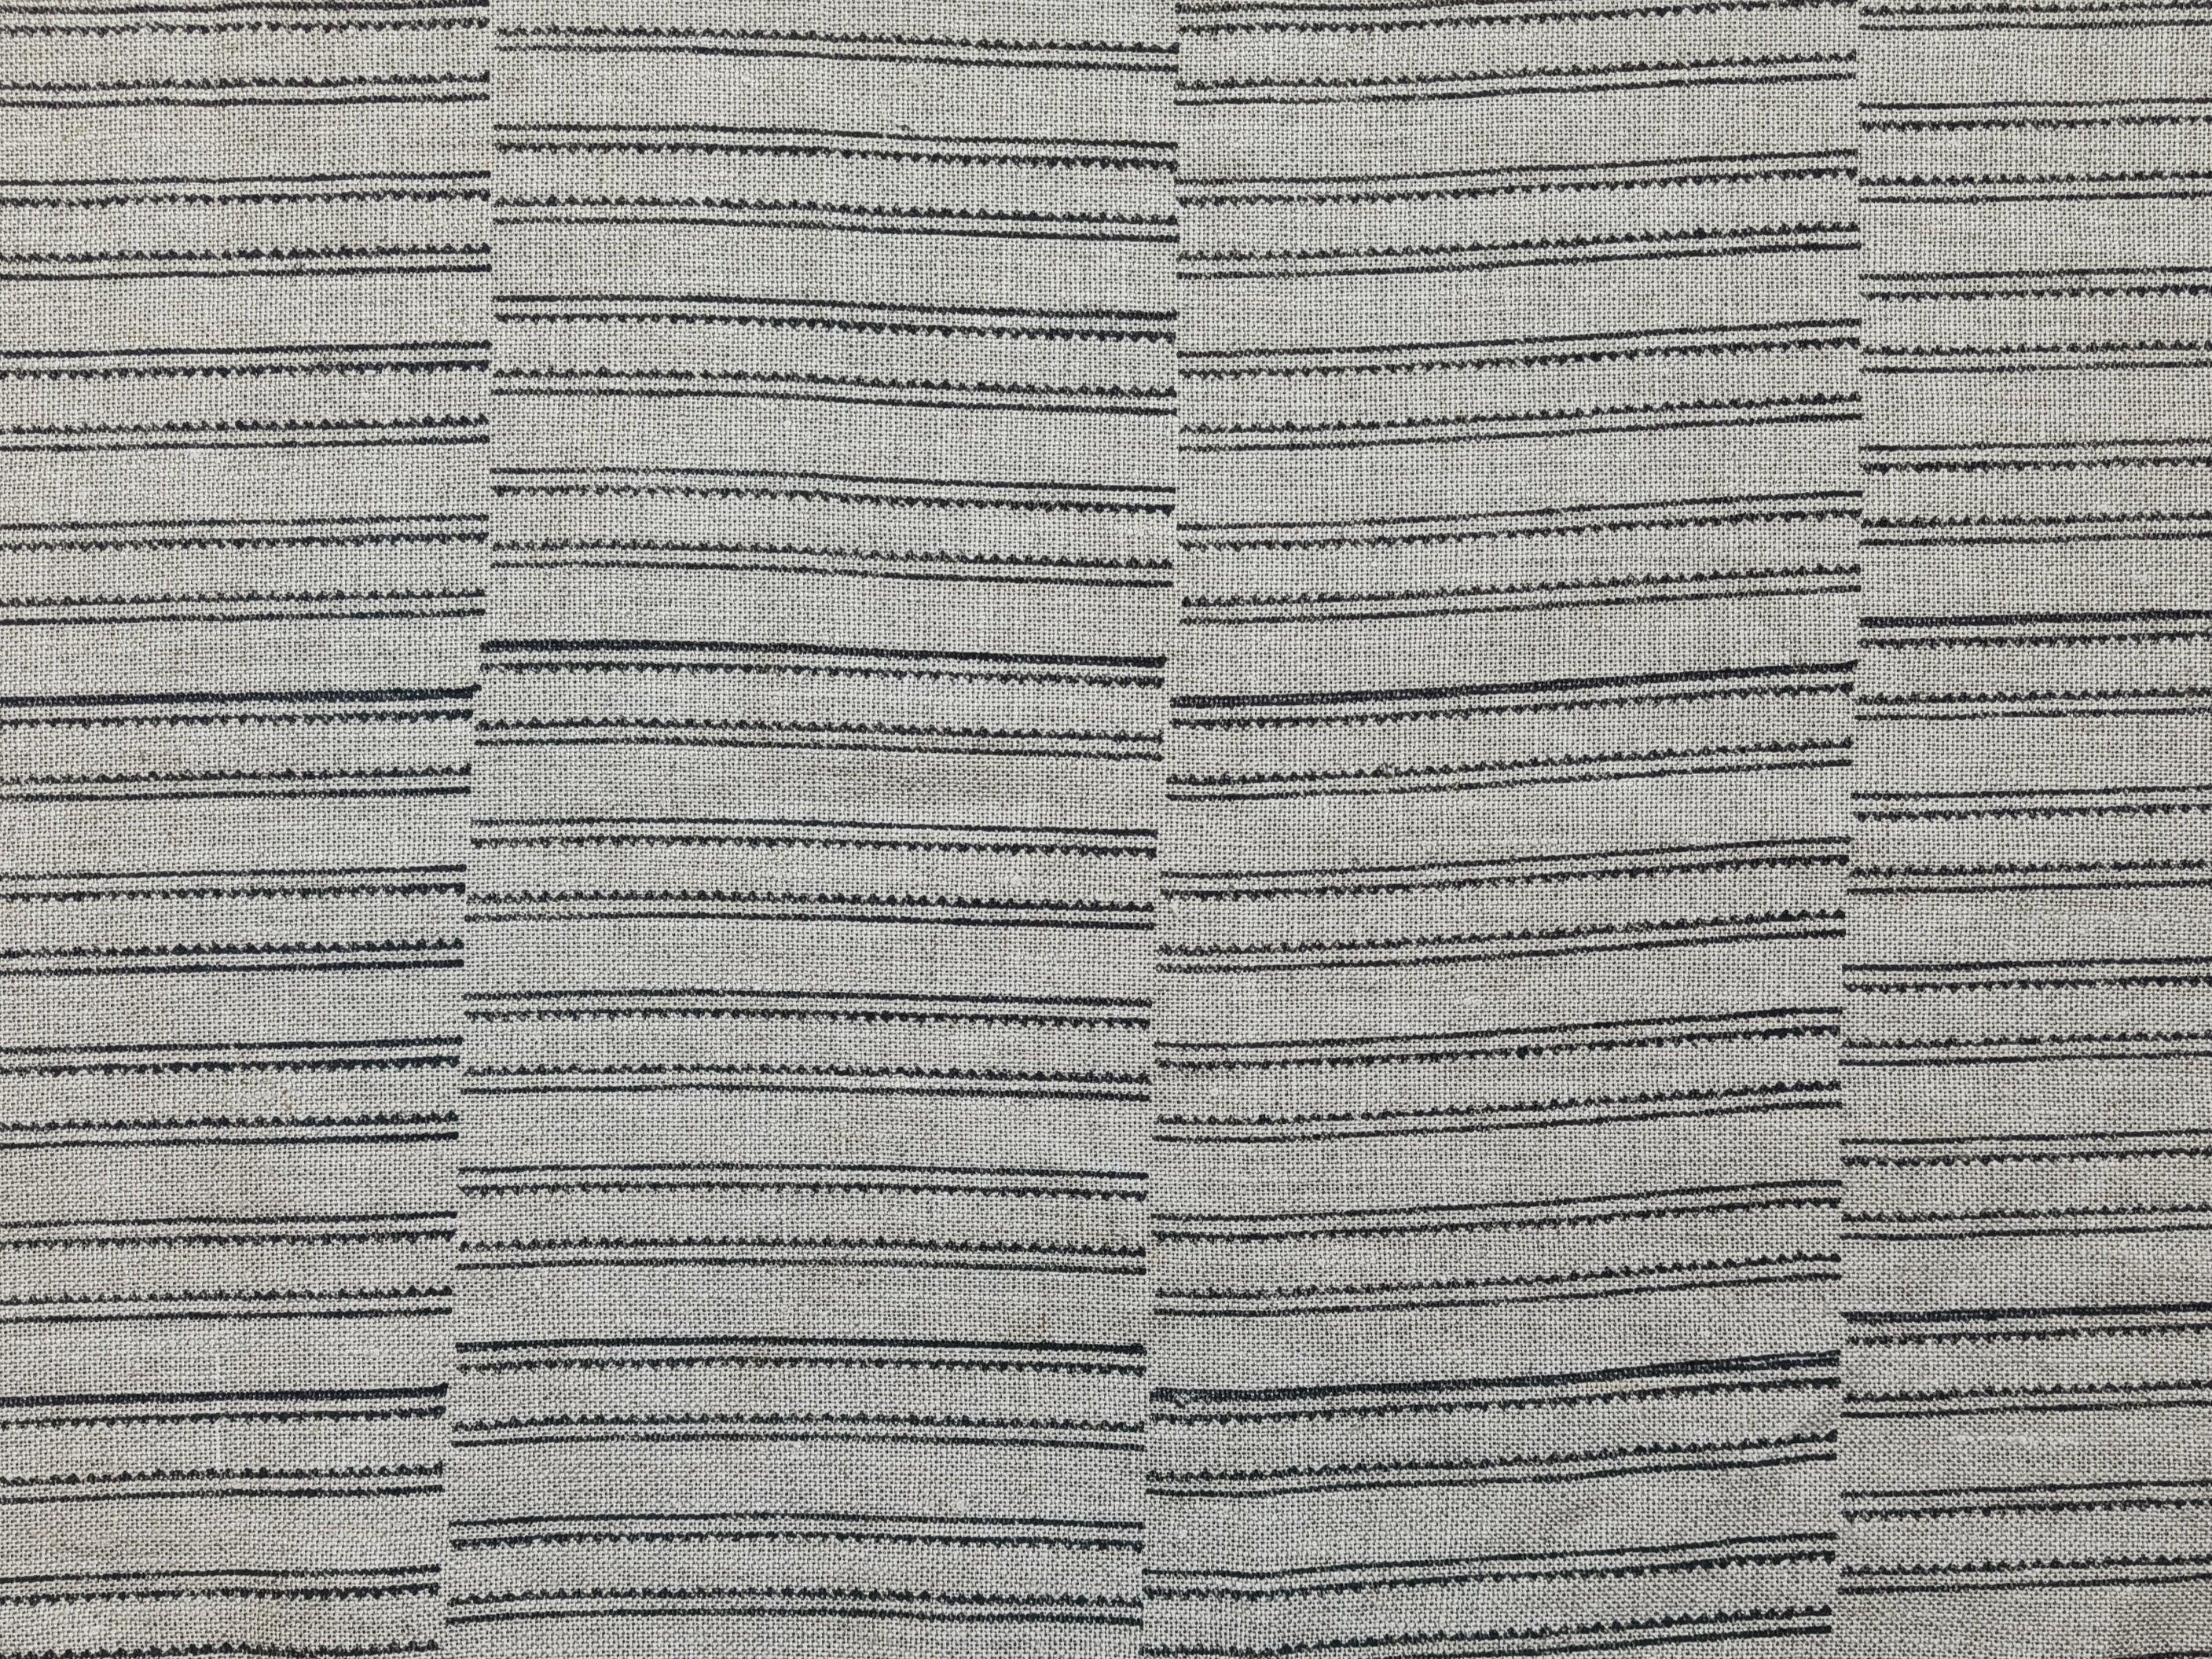 Zoomed-in image of BAIKUNTH's fabric featuring bold stripes